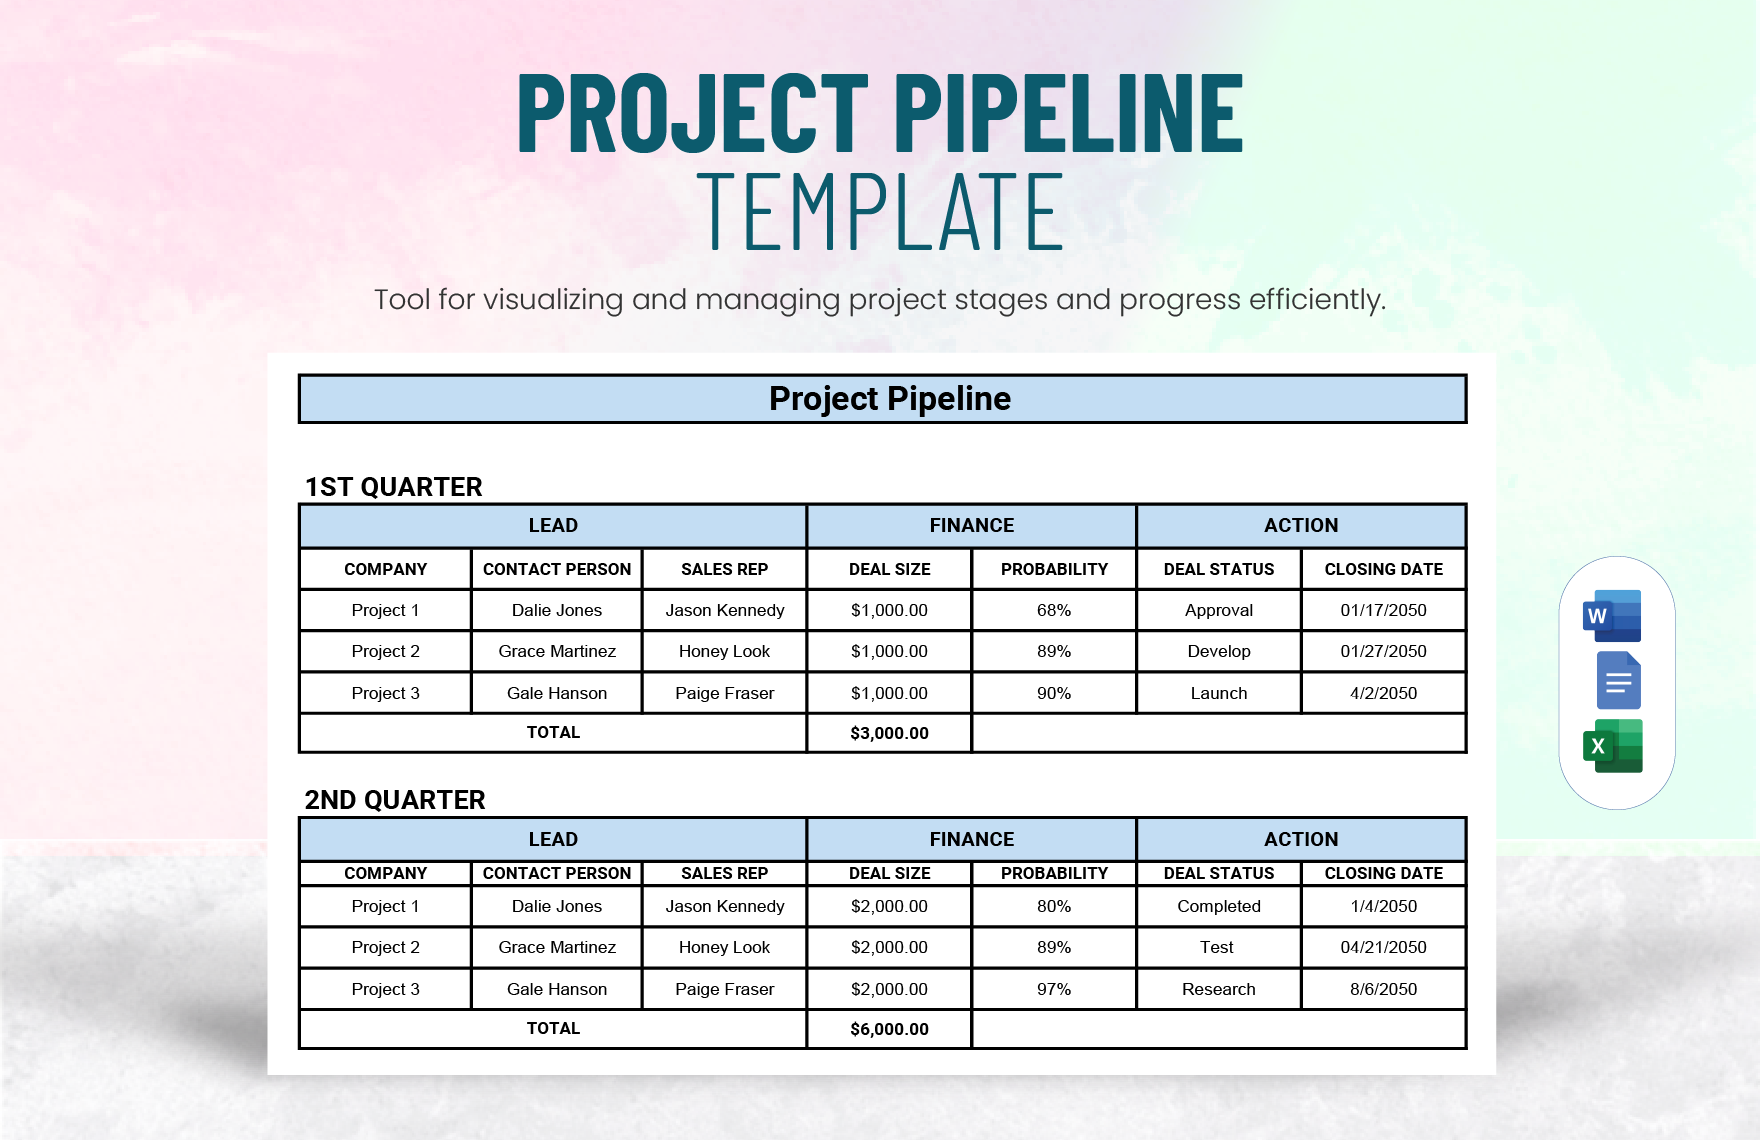 Project Pipeline Template in Word, Google Docs, Excel